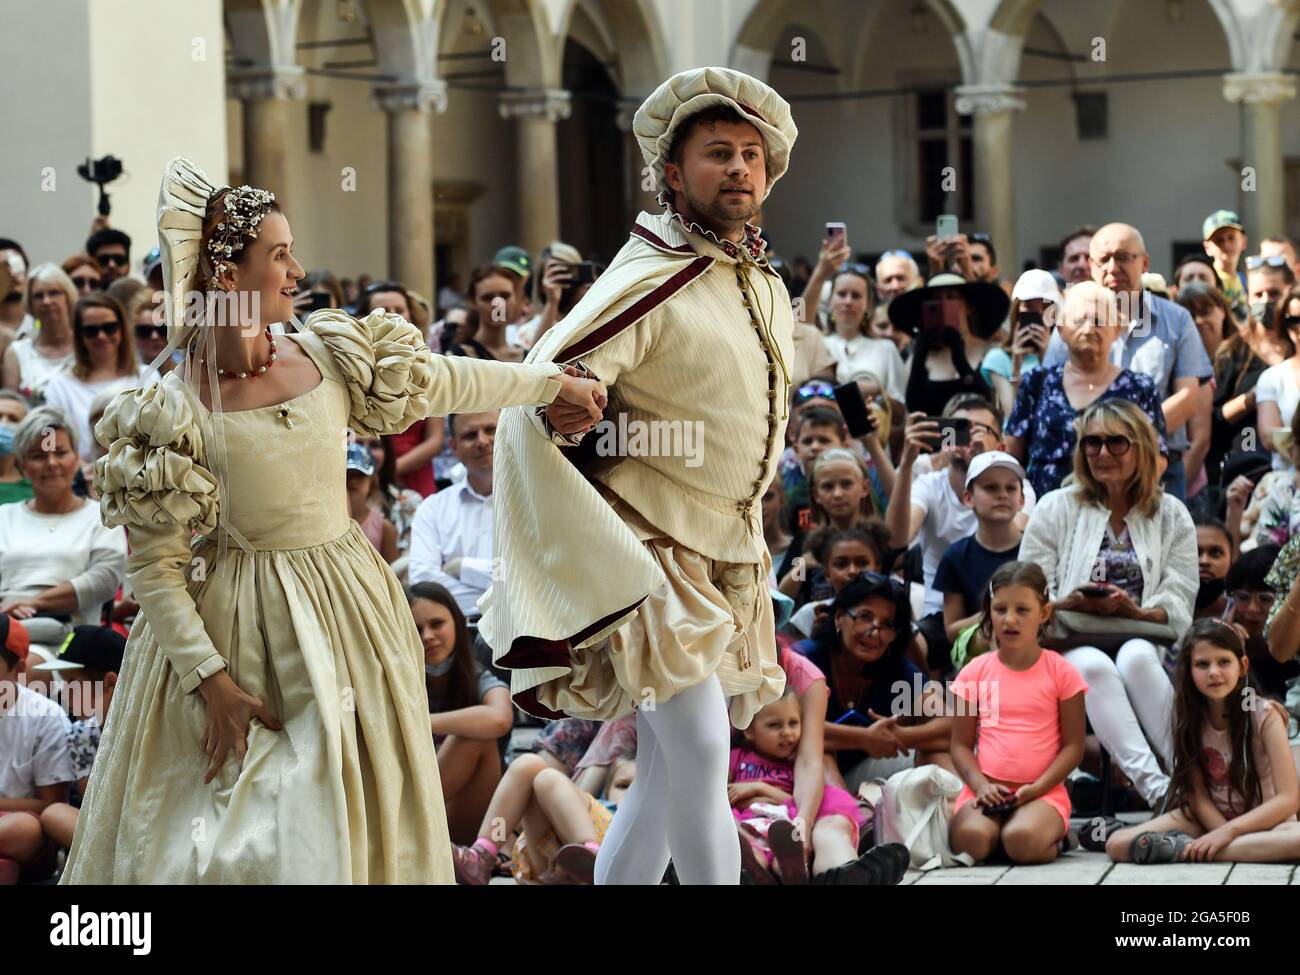 Krakow, Poland. 24th July, 2021. Performers dancing on stage during the fashion show.Dancers from the Terpsichore Dance Theatre and actors from Nomina Rosae Teatr presented a reconstruction of Renaissance fashion in the courtyard of the Wawel Royal Castle in Krakow. (Photo by Alex Bona/SOPA Images/Sipa USA) Credit: Sipa USA/Alamy Live News Stock Photo